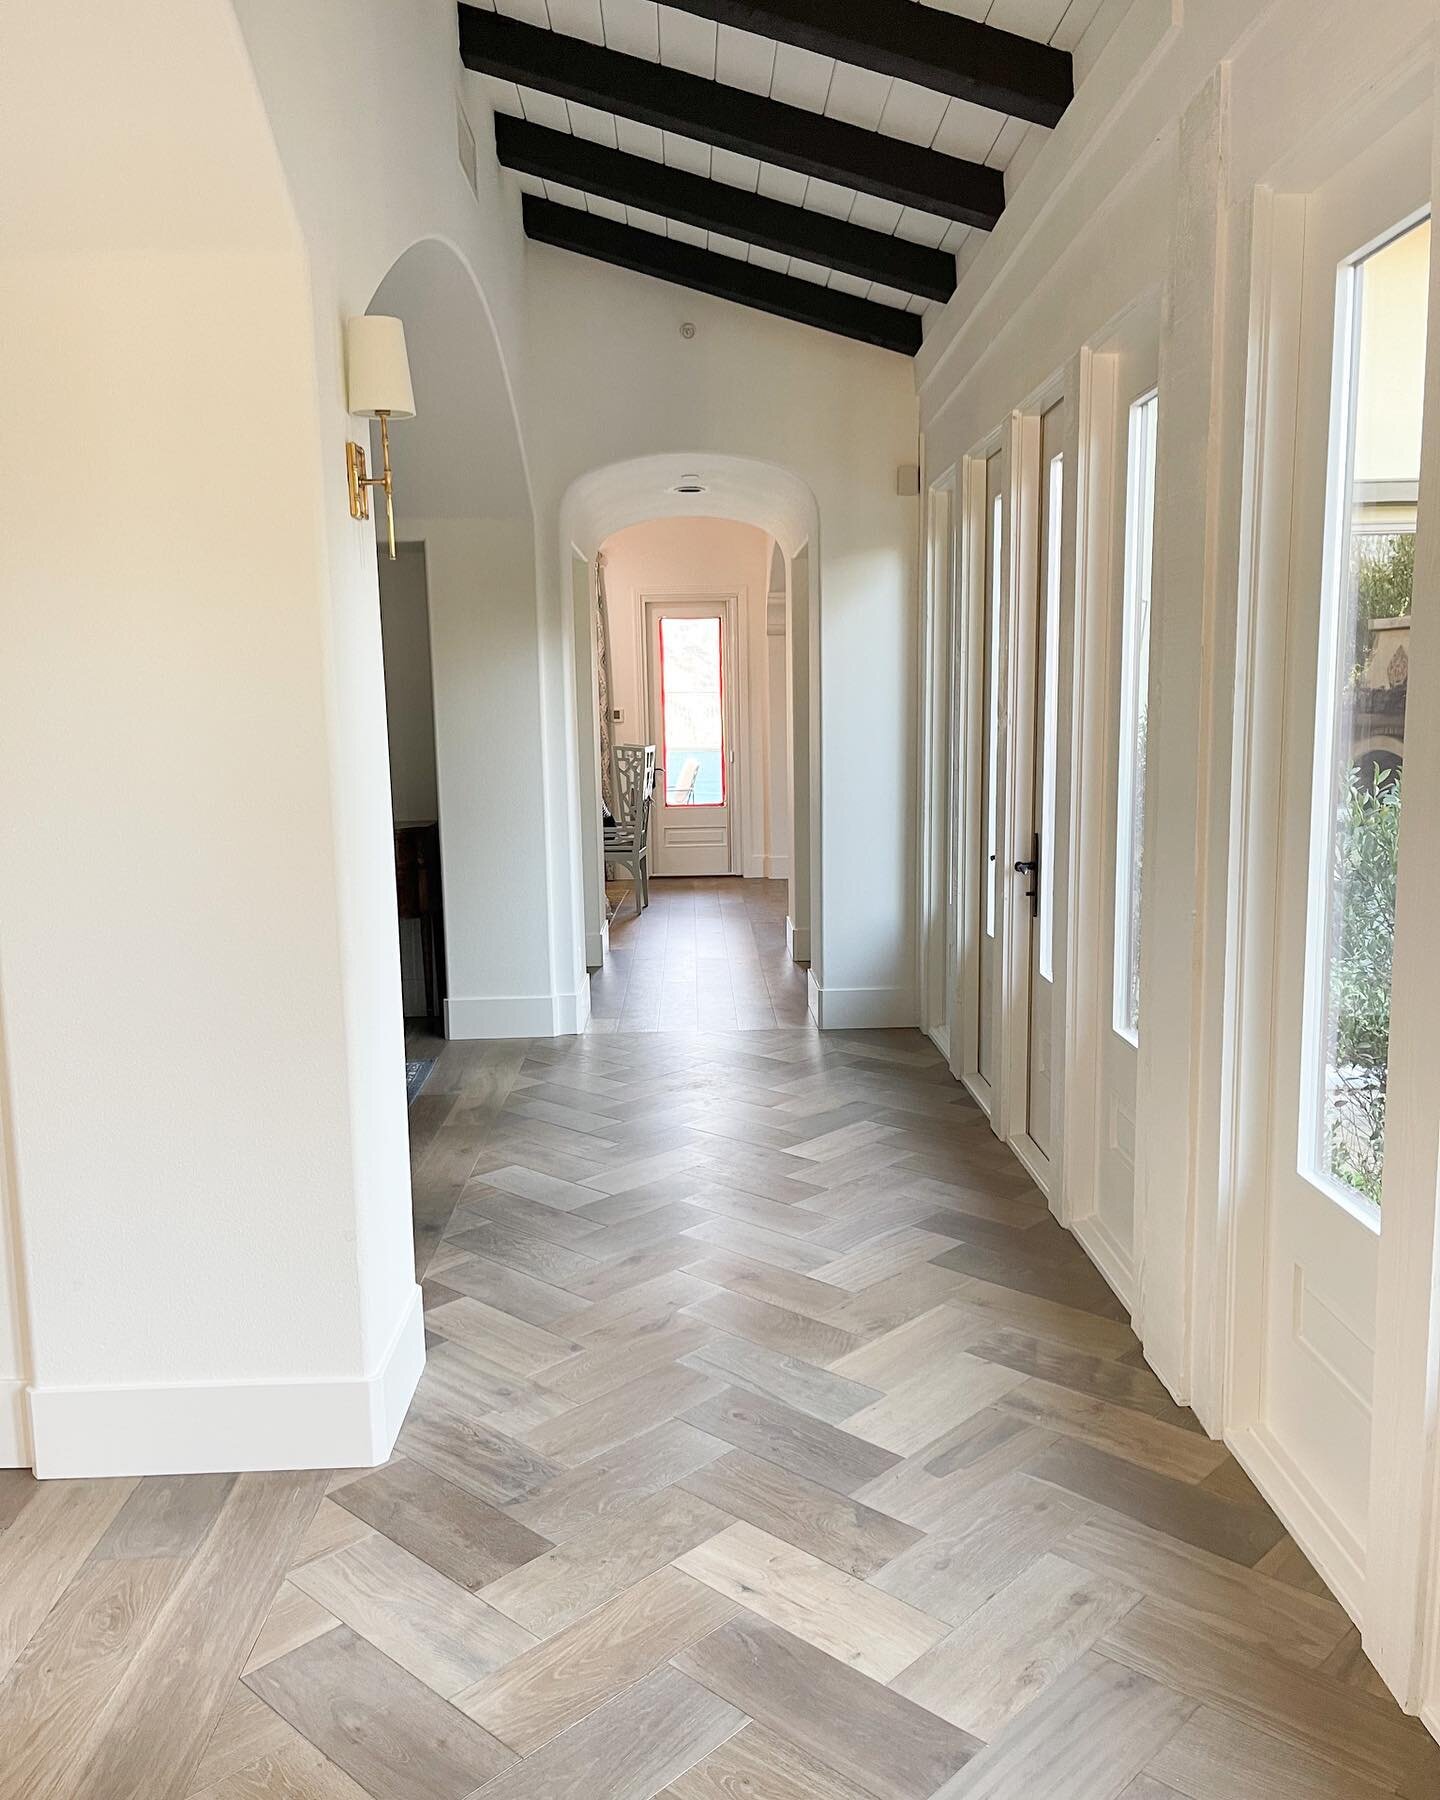 This entry is one of our favorite designs! The herringbone design captures your eye as you walk through door, setting the stage for what&rsquo;s to come.. designed by #driftwooddesignsbykm #frontenterance #frontentry #frontentrance #frontenterence #f